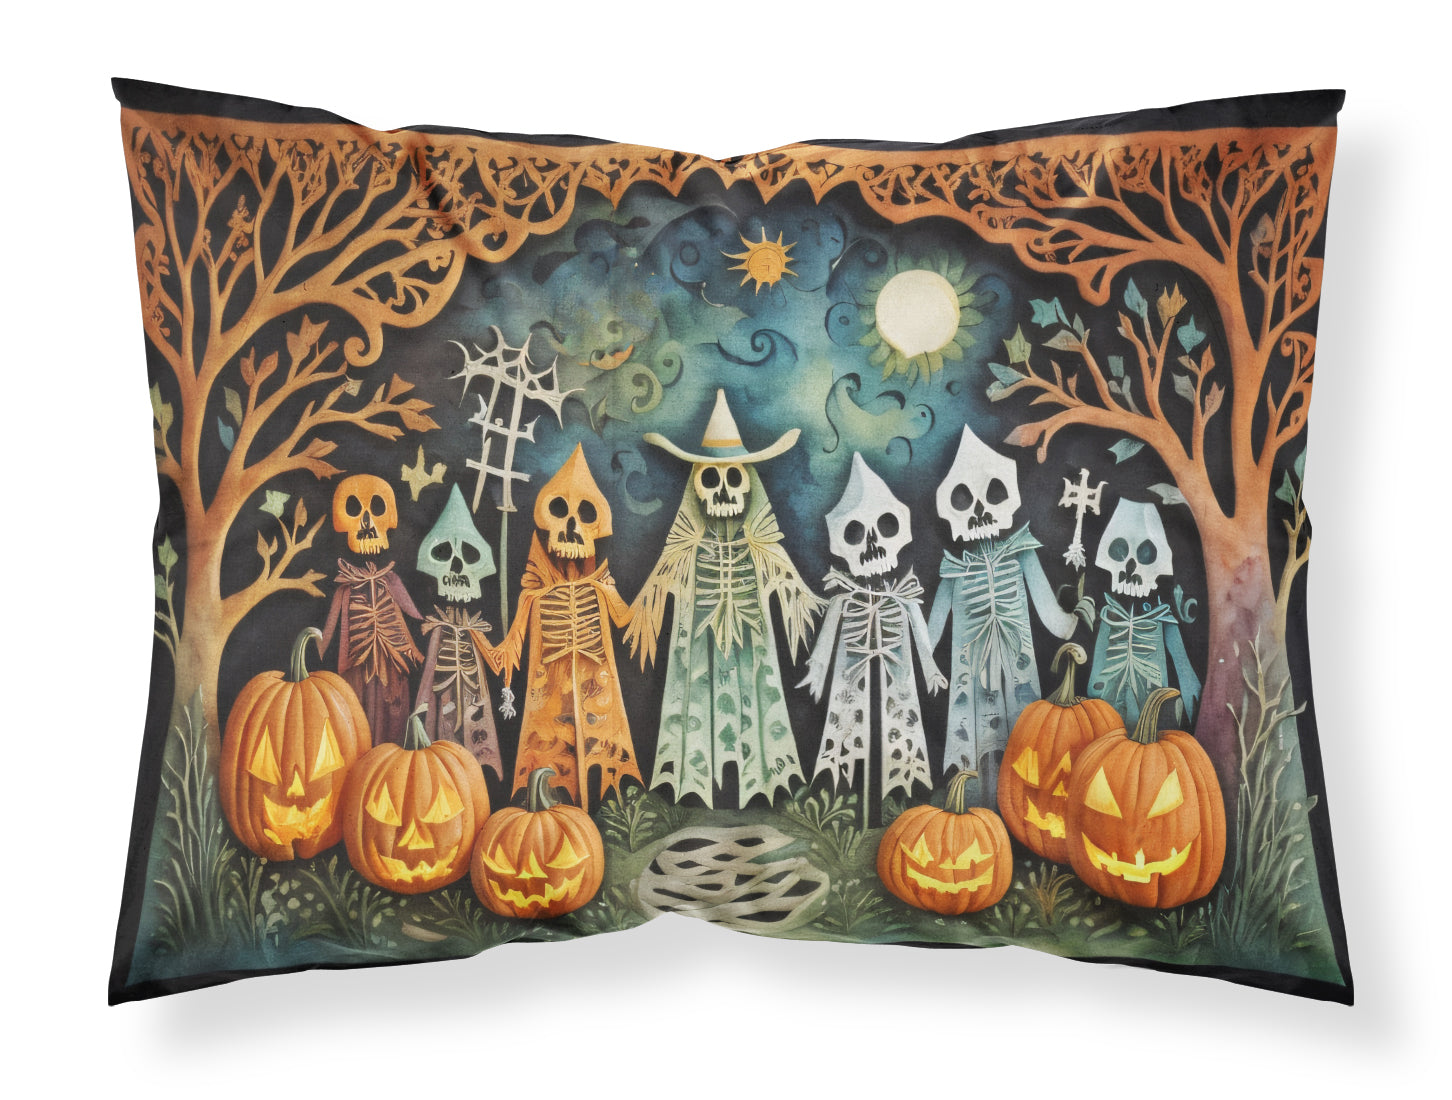 Buy this Papel Picado Skeletons Spooky Halloween Fabric Standard Pillowcase